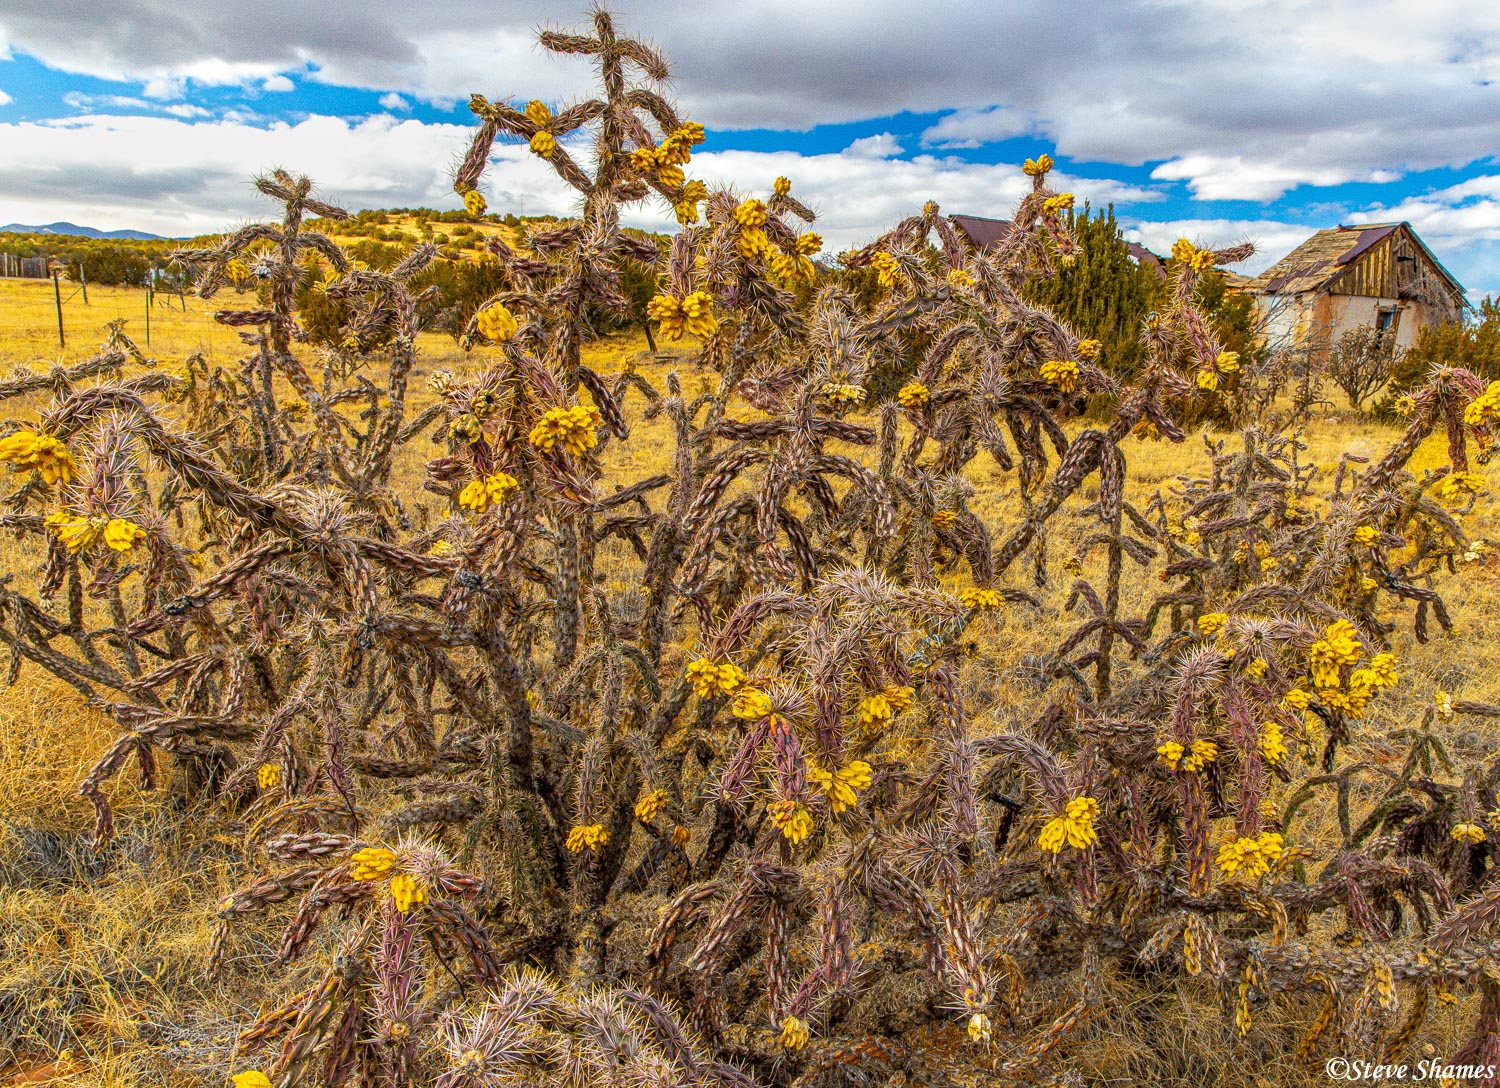 Some prickly cactus in rural Torrance County, New Mexico